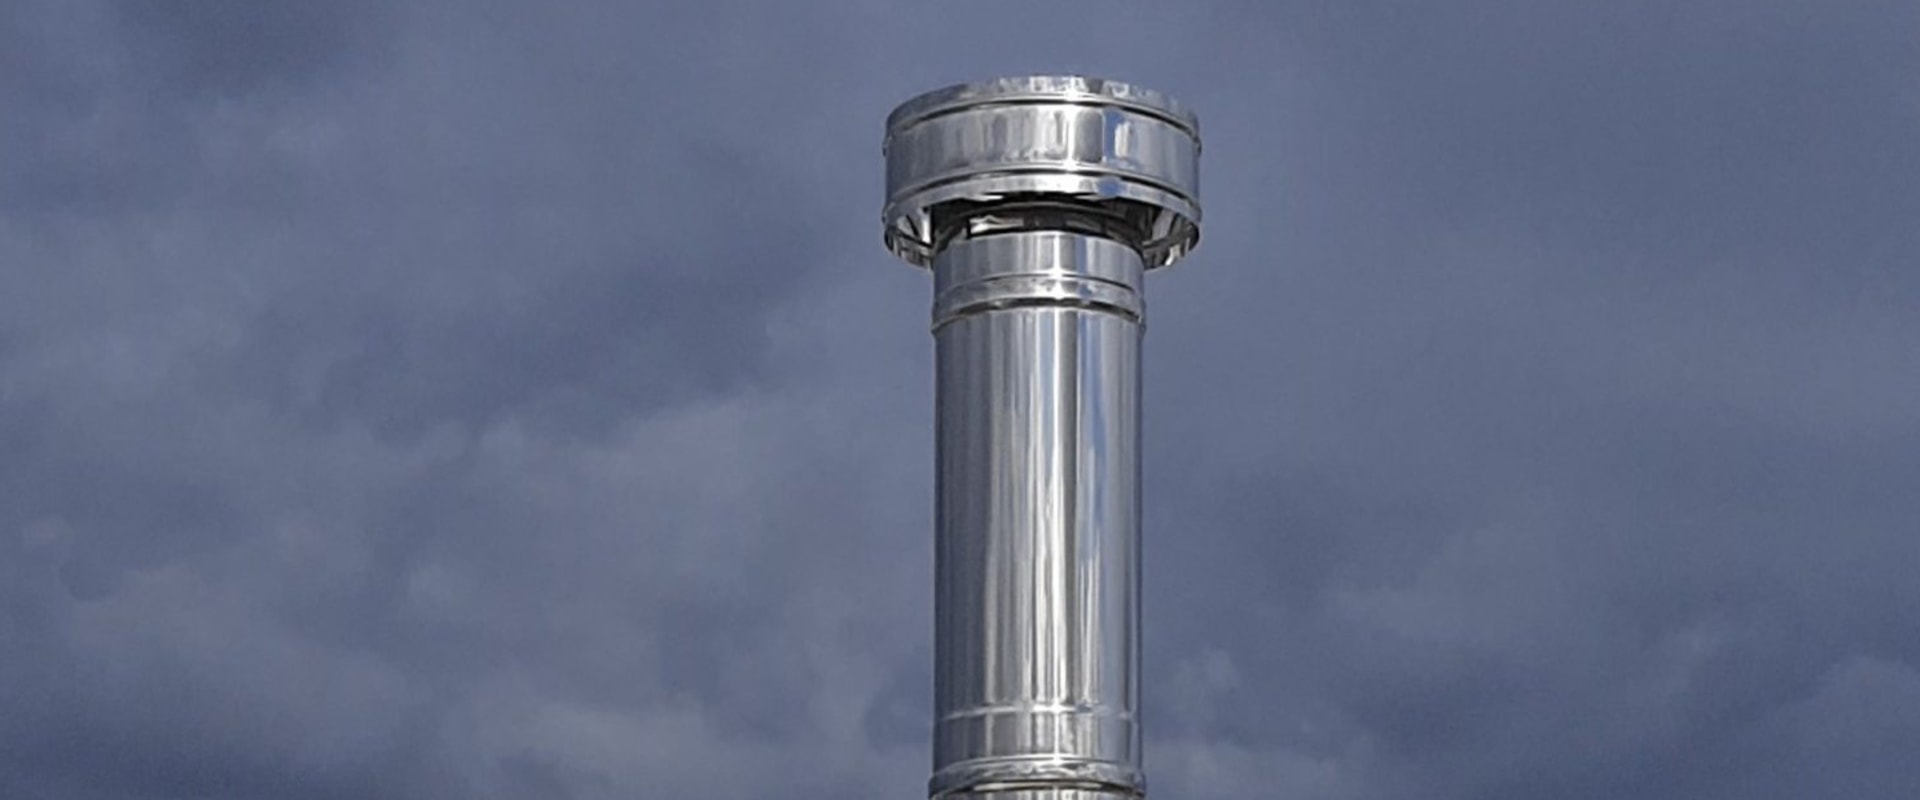 Upgrading to Stainless Steel Flues: Why it's Important for Your Chimney